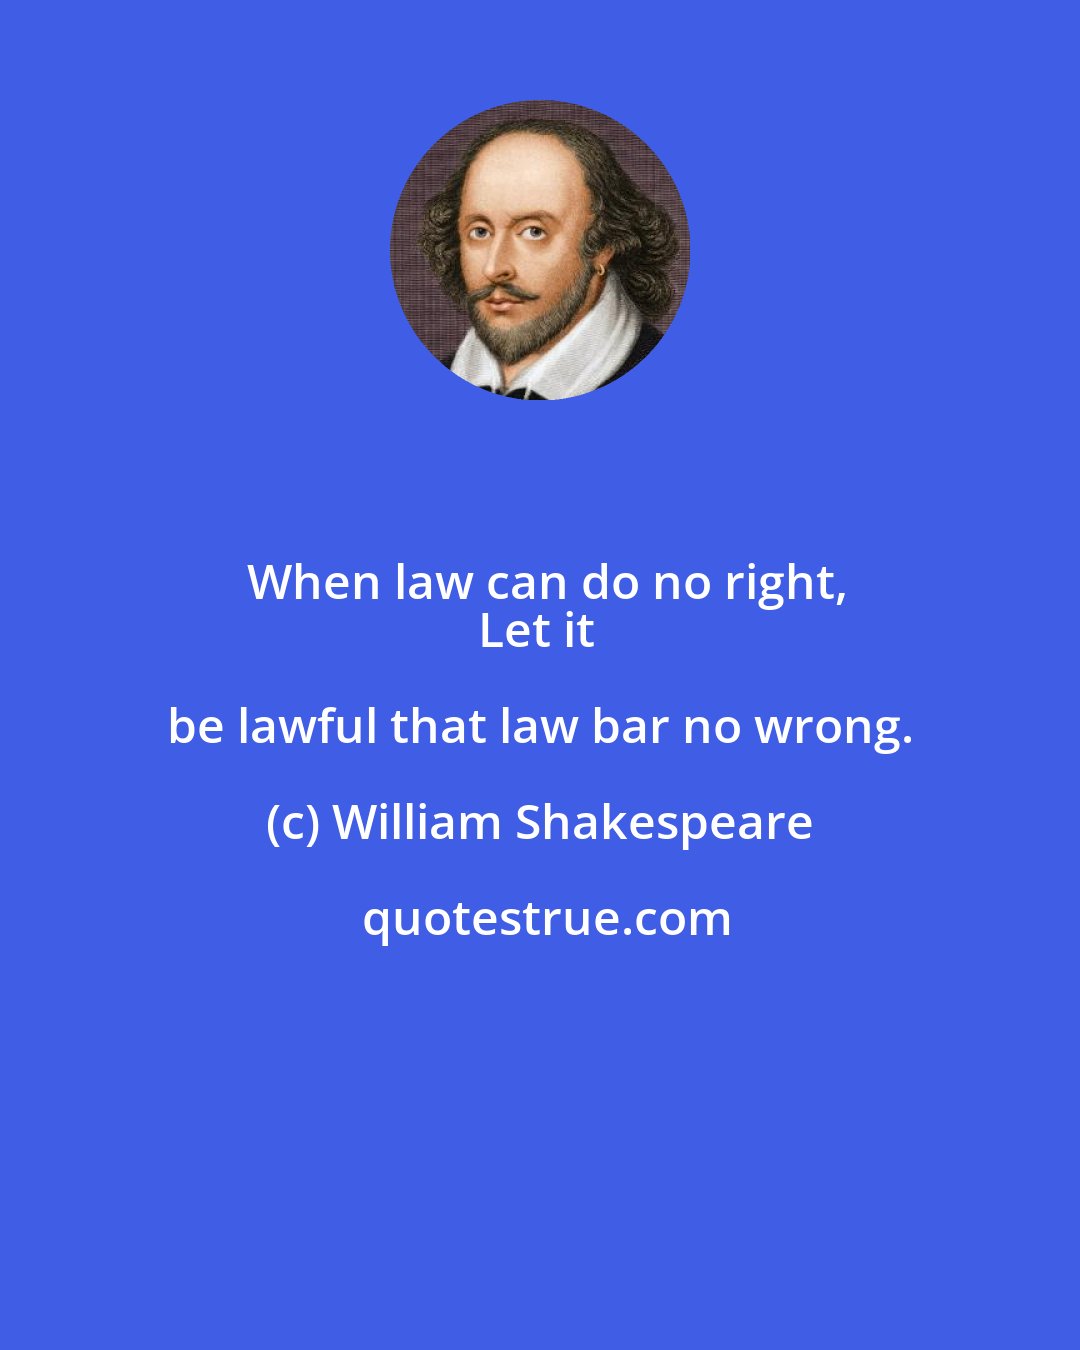 William Shakespeare: When law can do no right,
Let it be lawful that law bar no wrong.